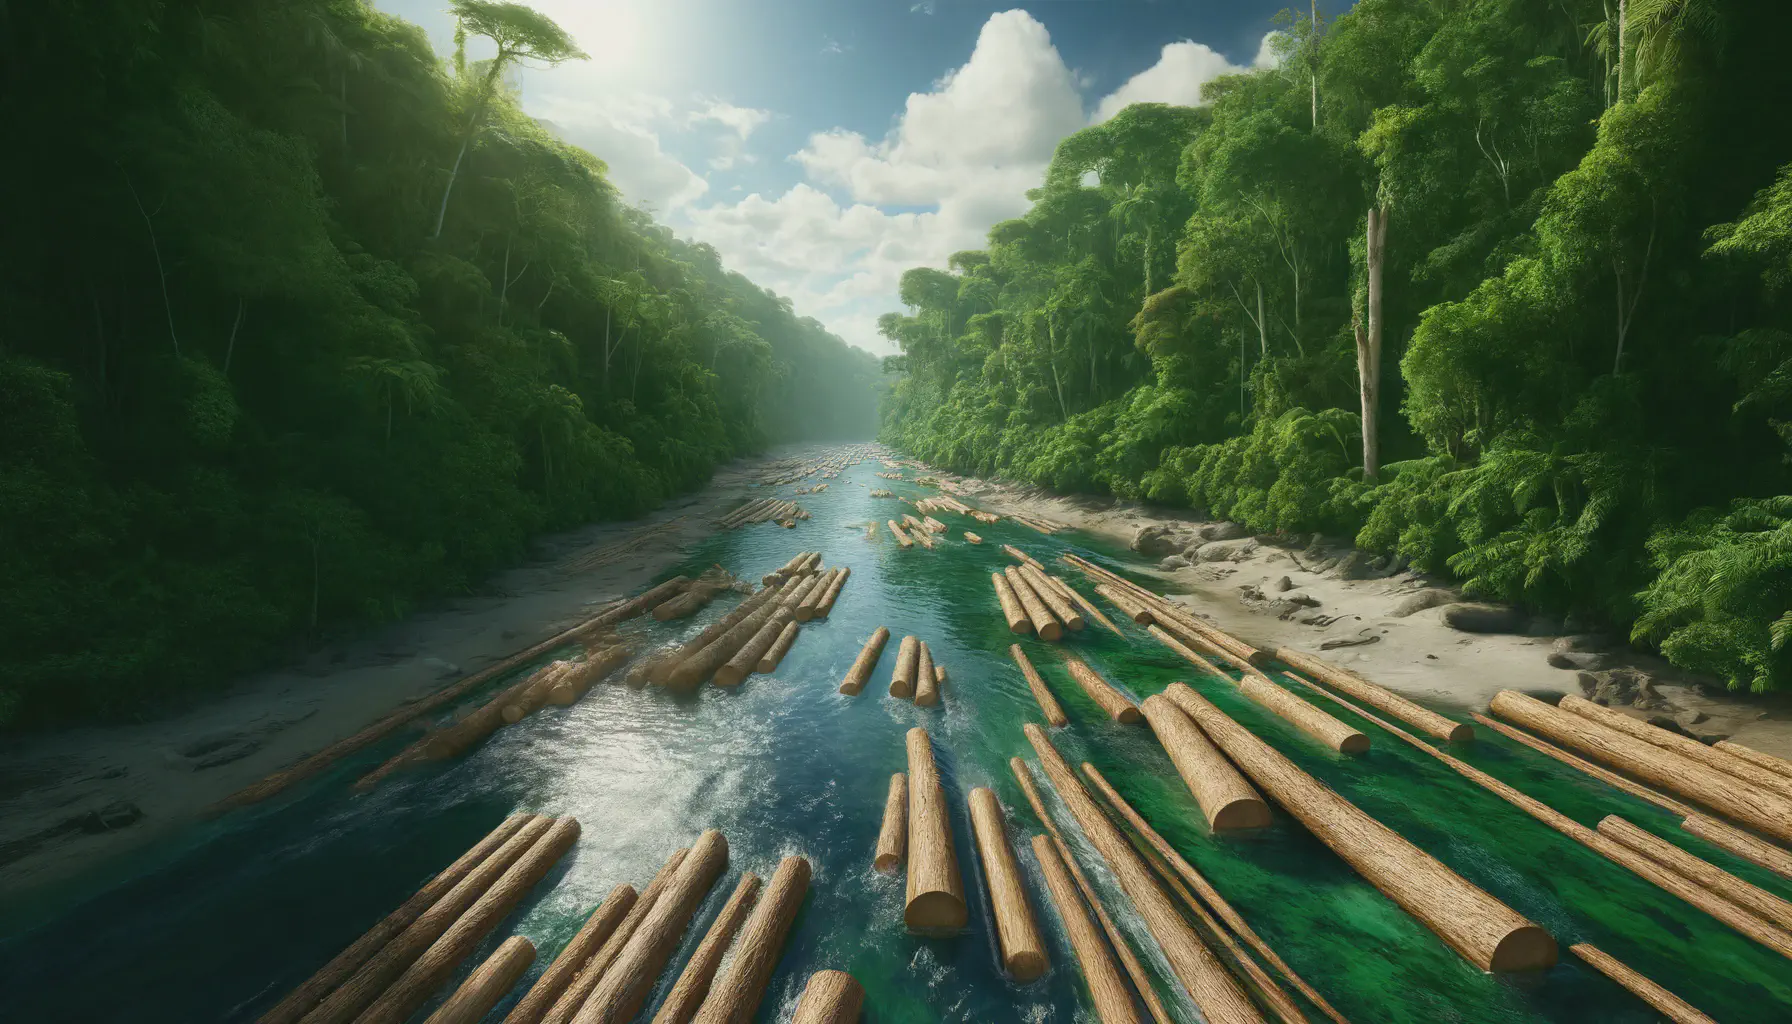 Cut logs floating down a river in the Amazon.